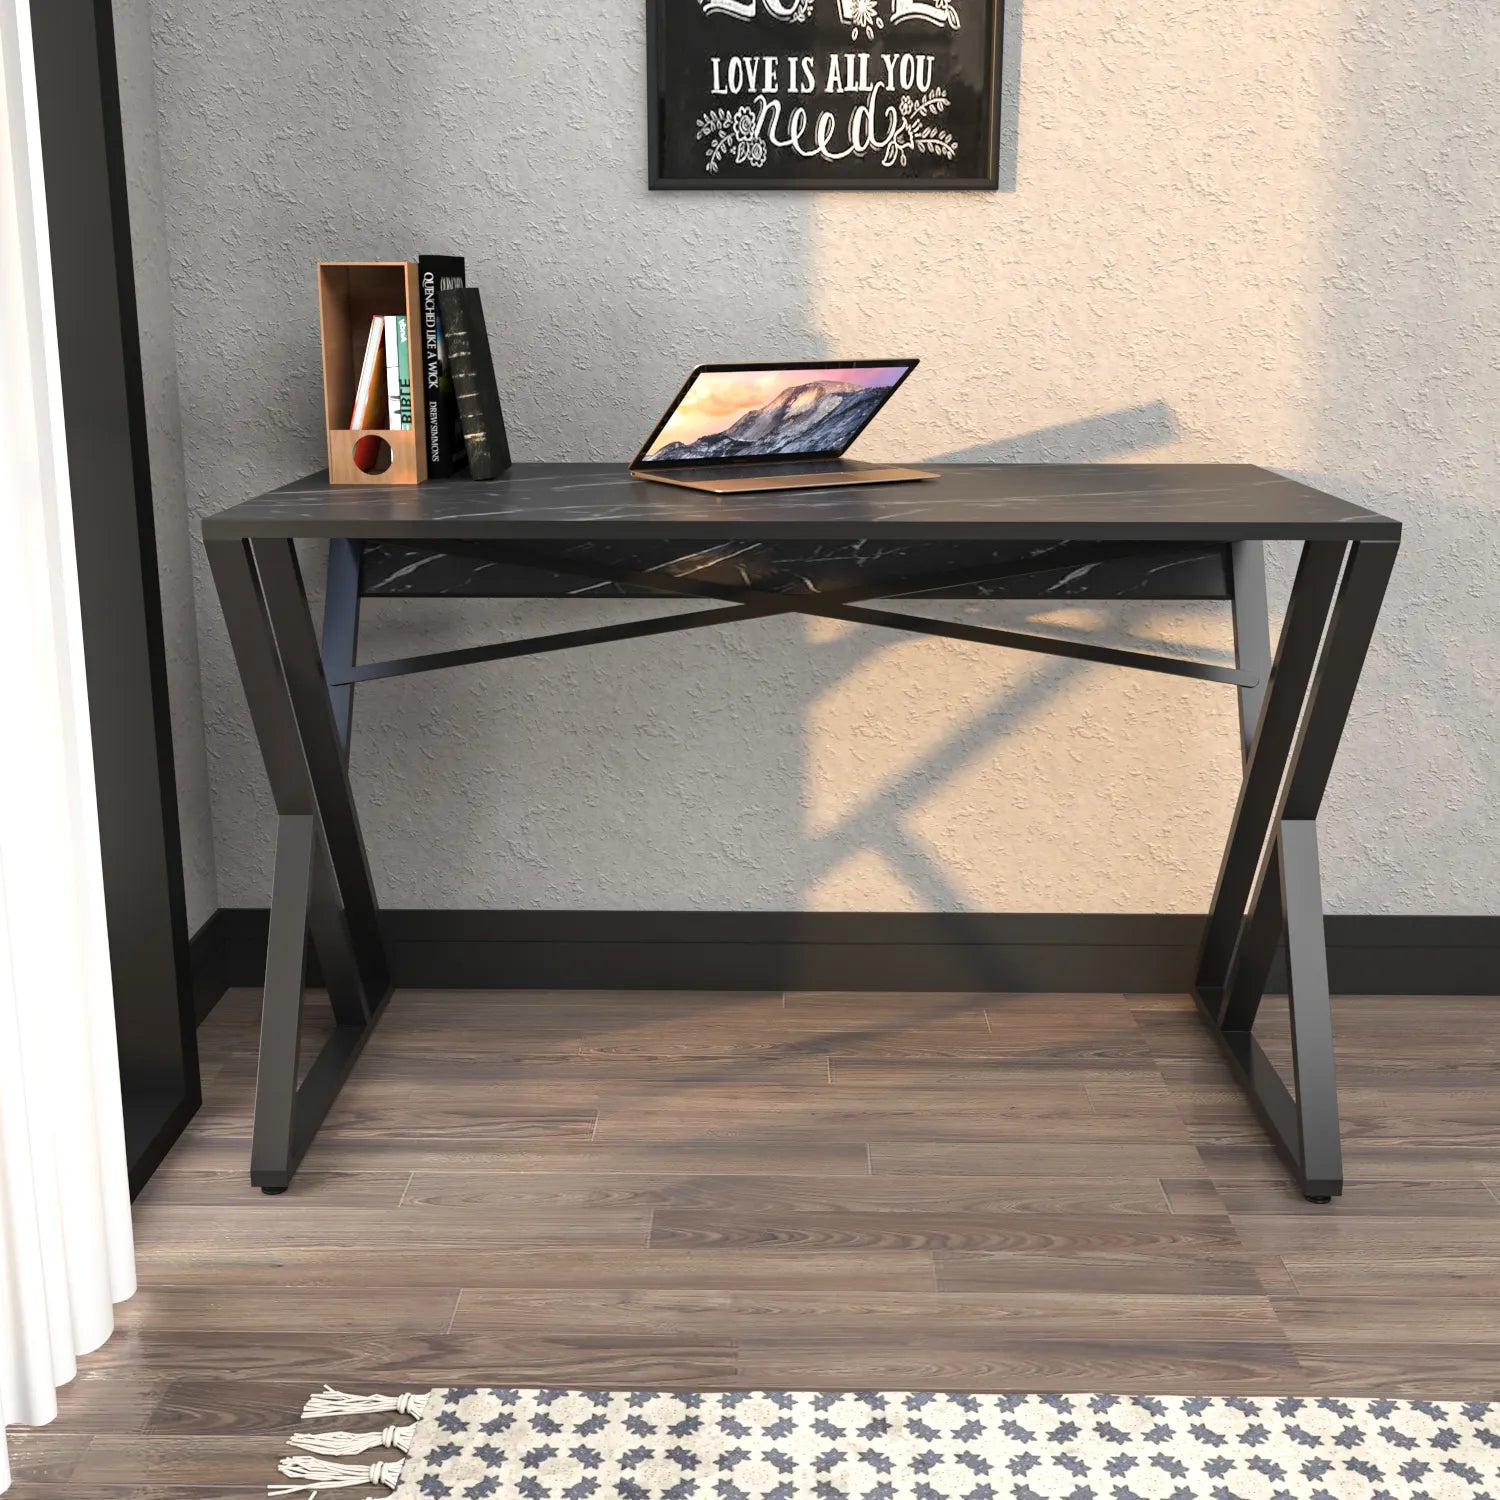 Gyza 47 inch Wide Computer Writing Desk with Metal Frame